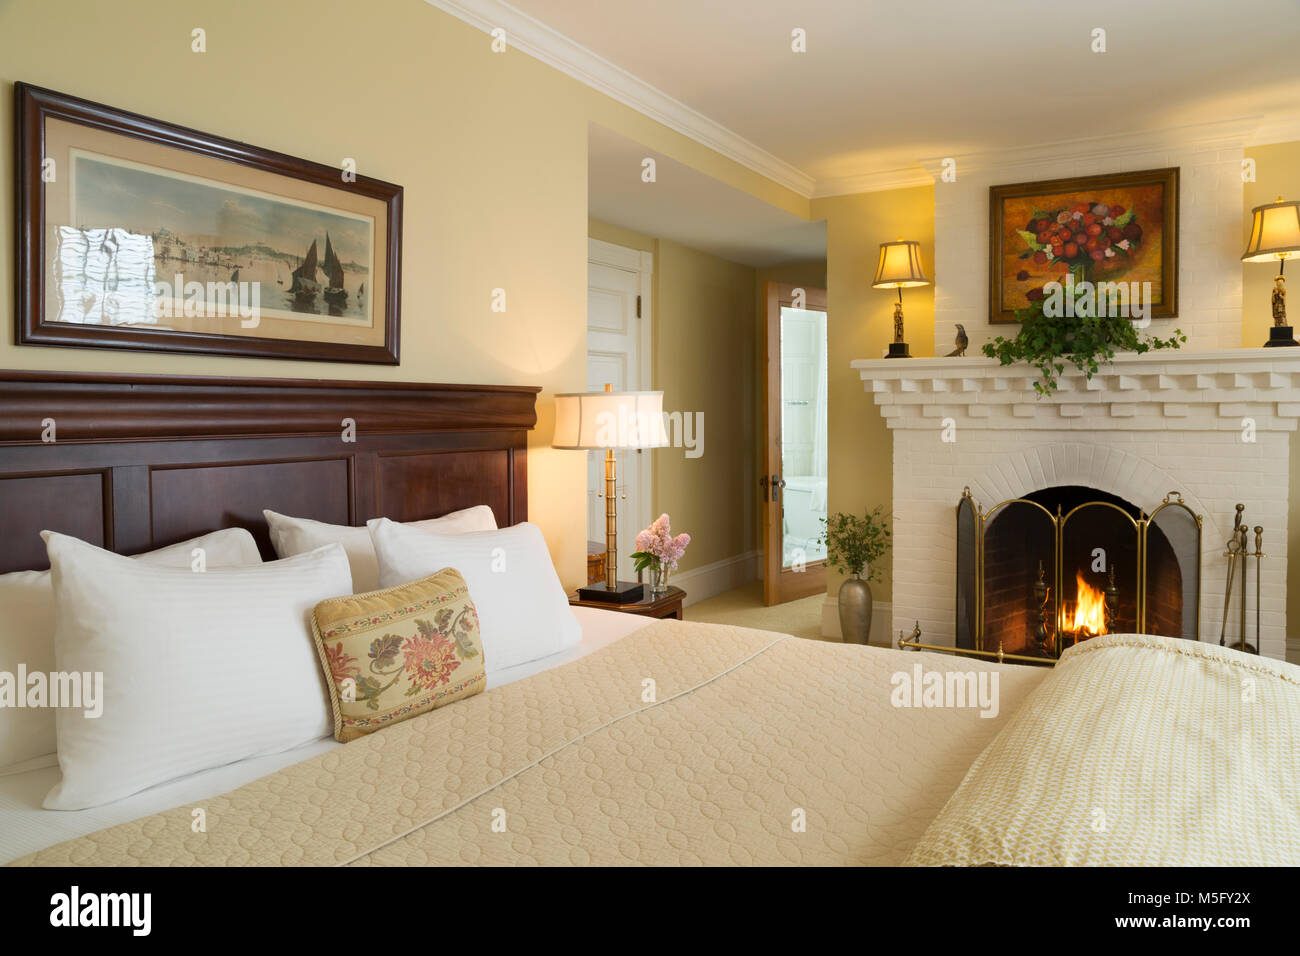 Bedroom with fireplace and yellow color scheme, Blair Hill Inn, Greenville, Maine Stock Photo